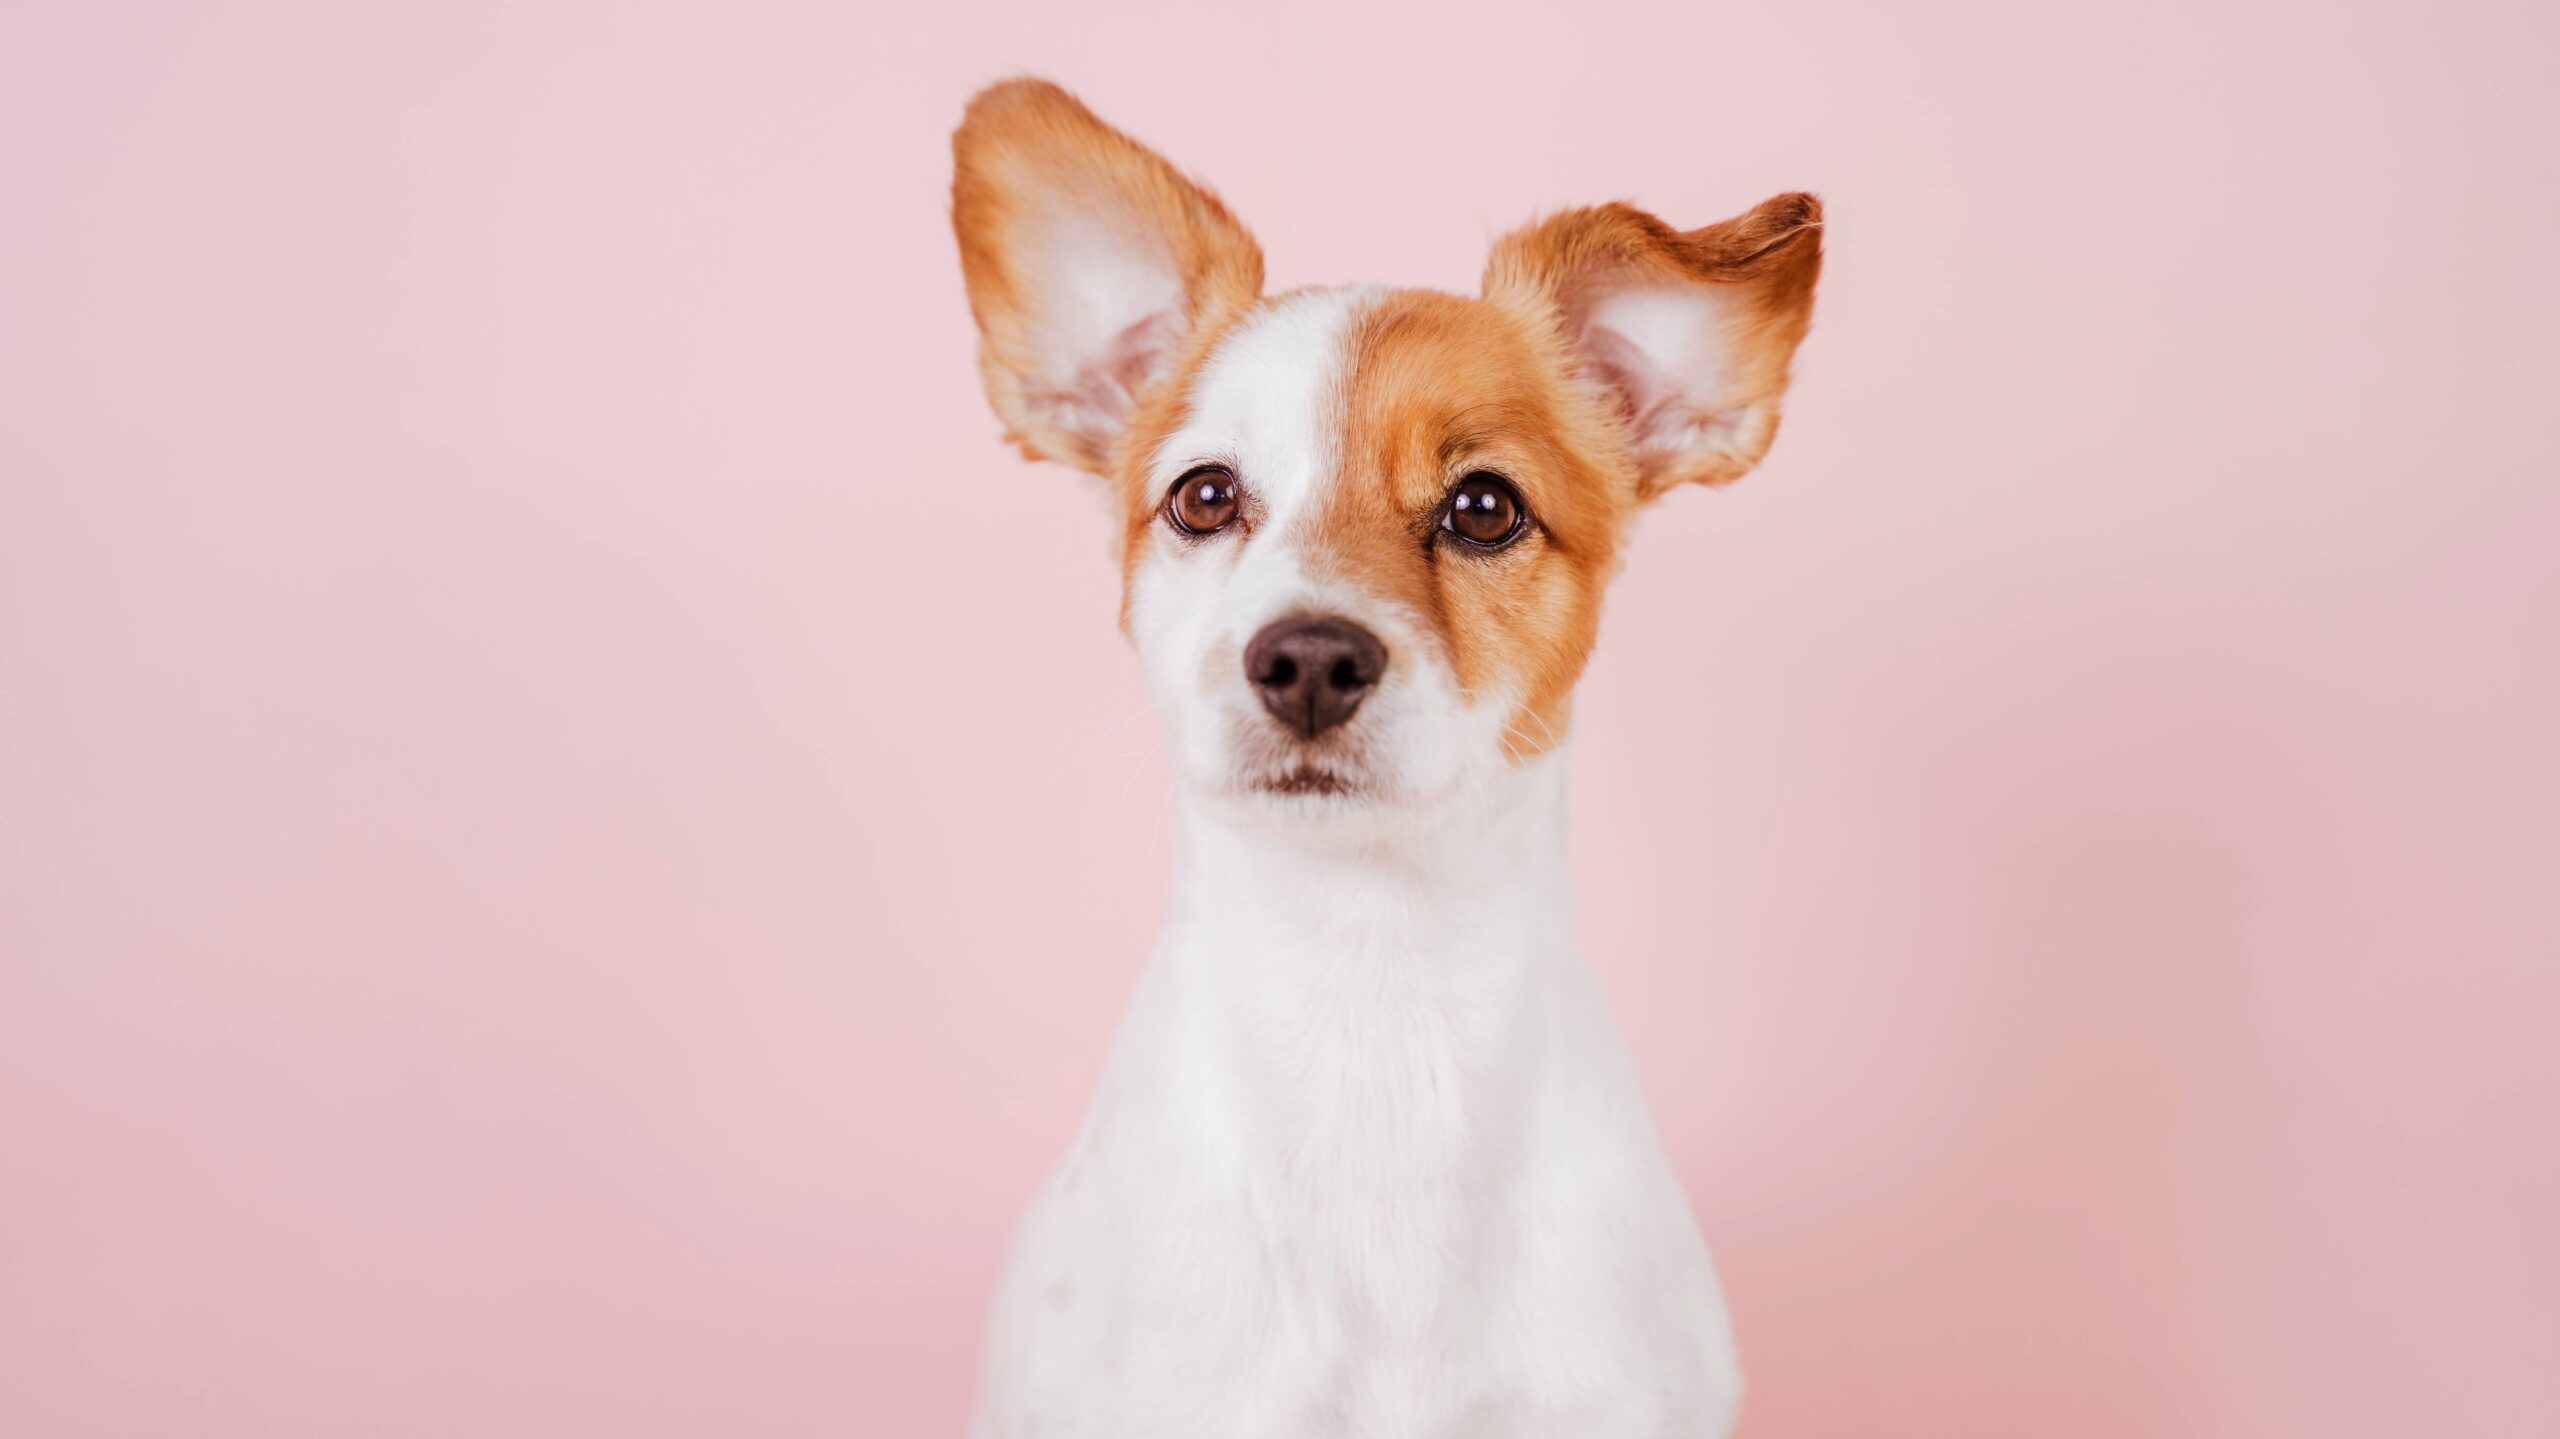 portrait of cute jack russell over pink background. Colorful, spring or summer concept